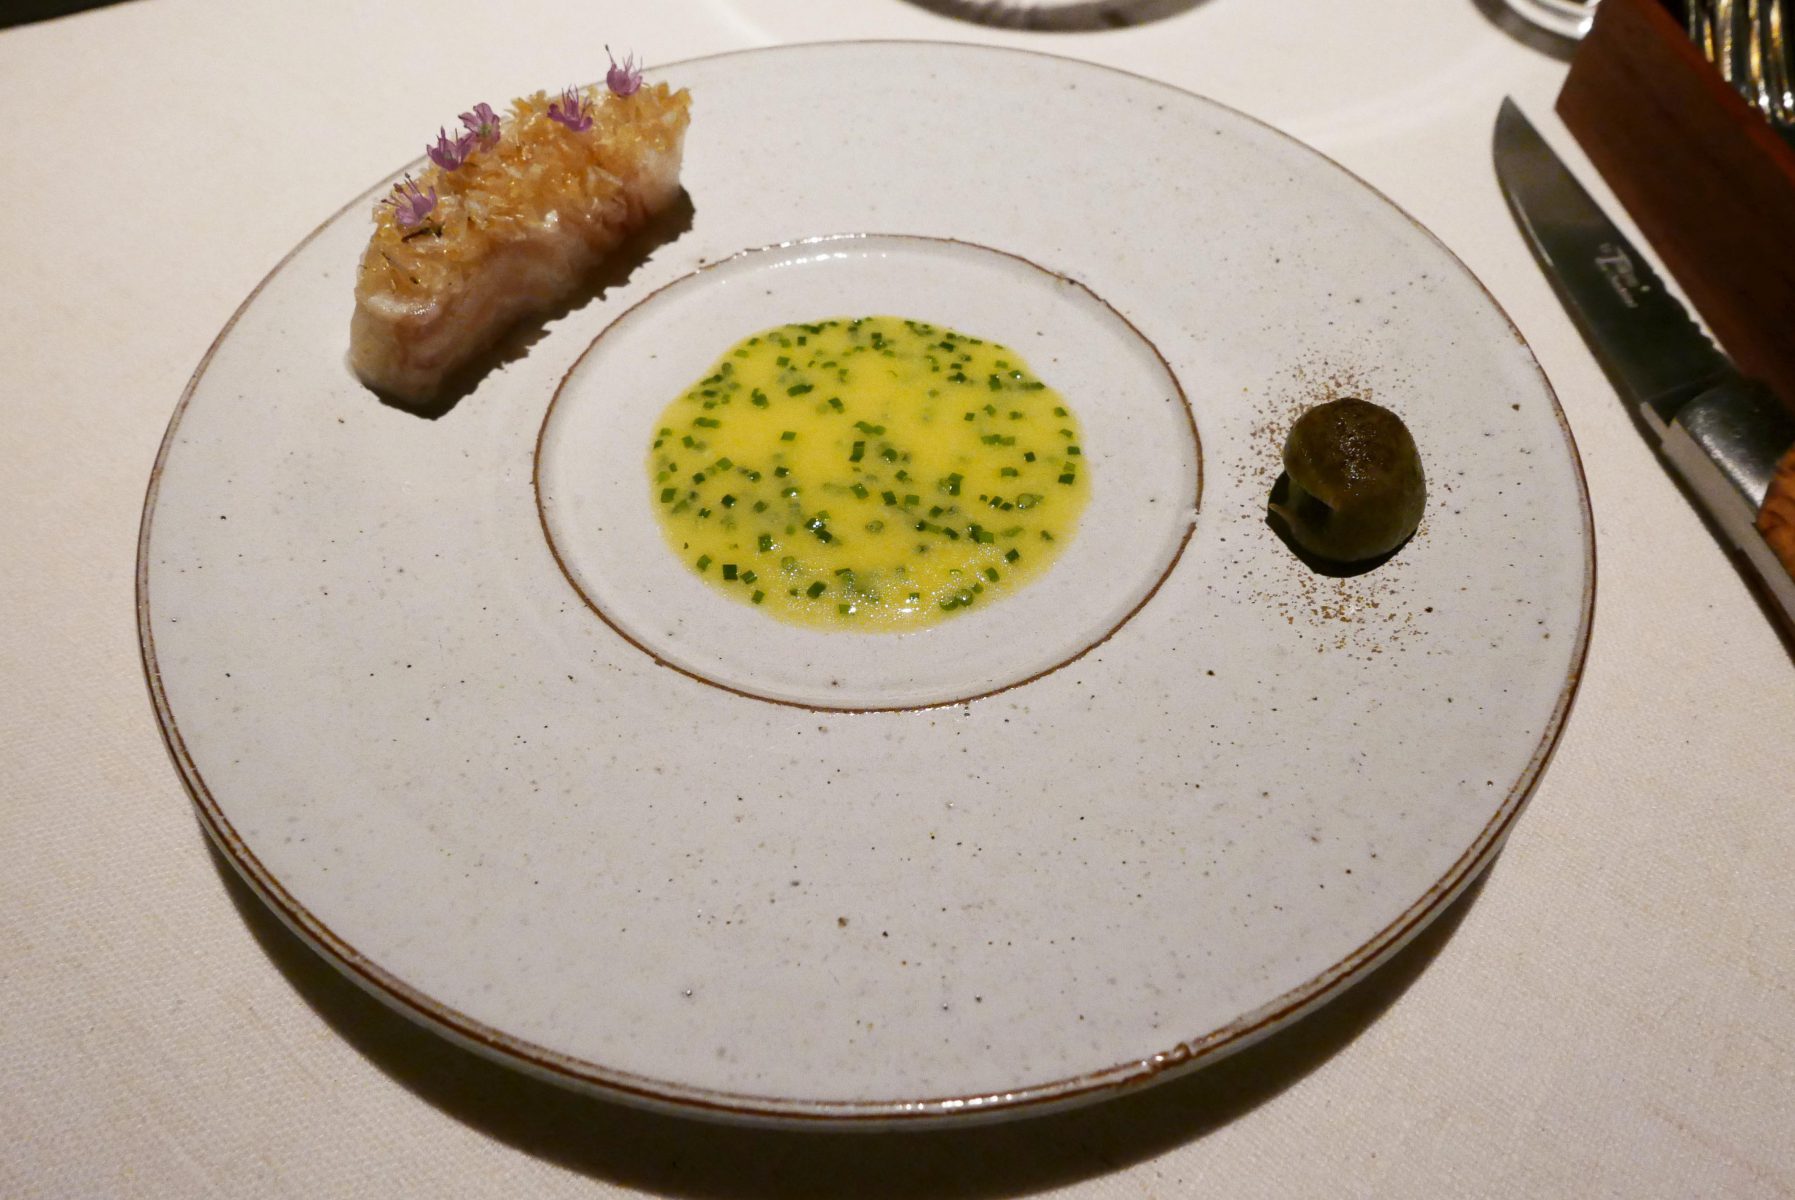 Slow baked turbot,toasted creme of brown algae,carp scales and just churned butter with bouillon of the bones